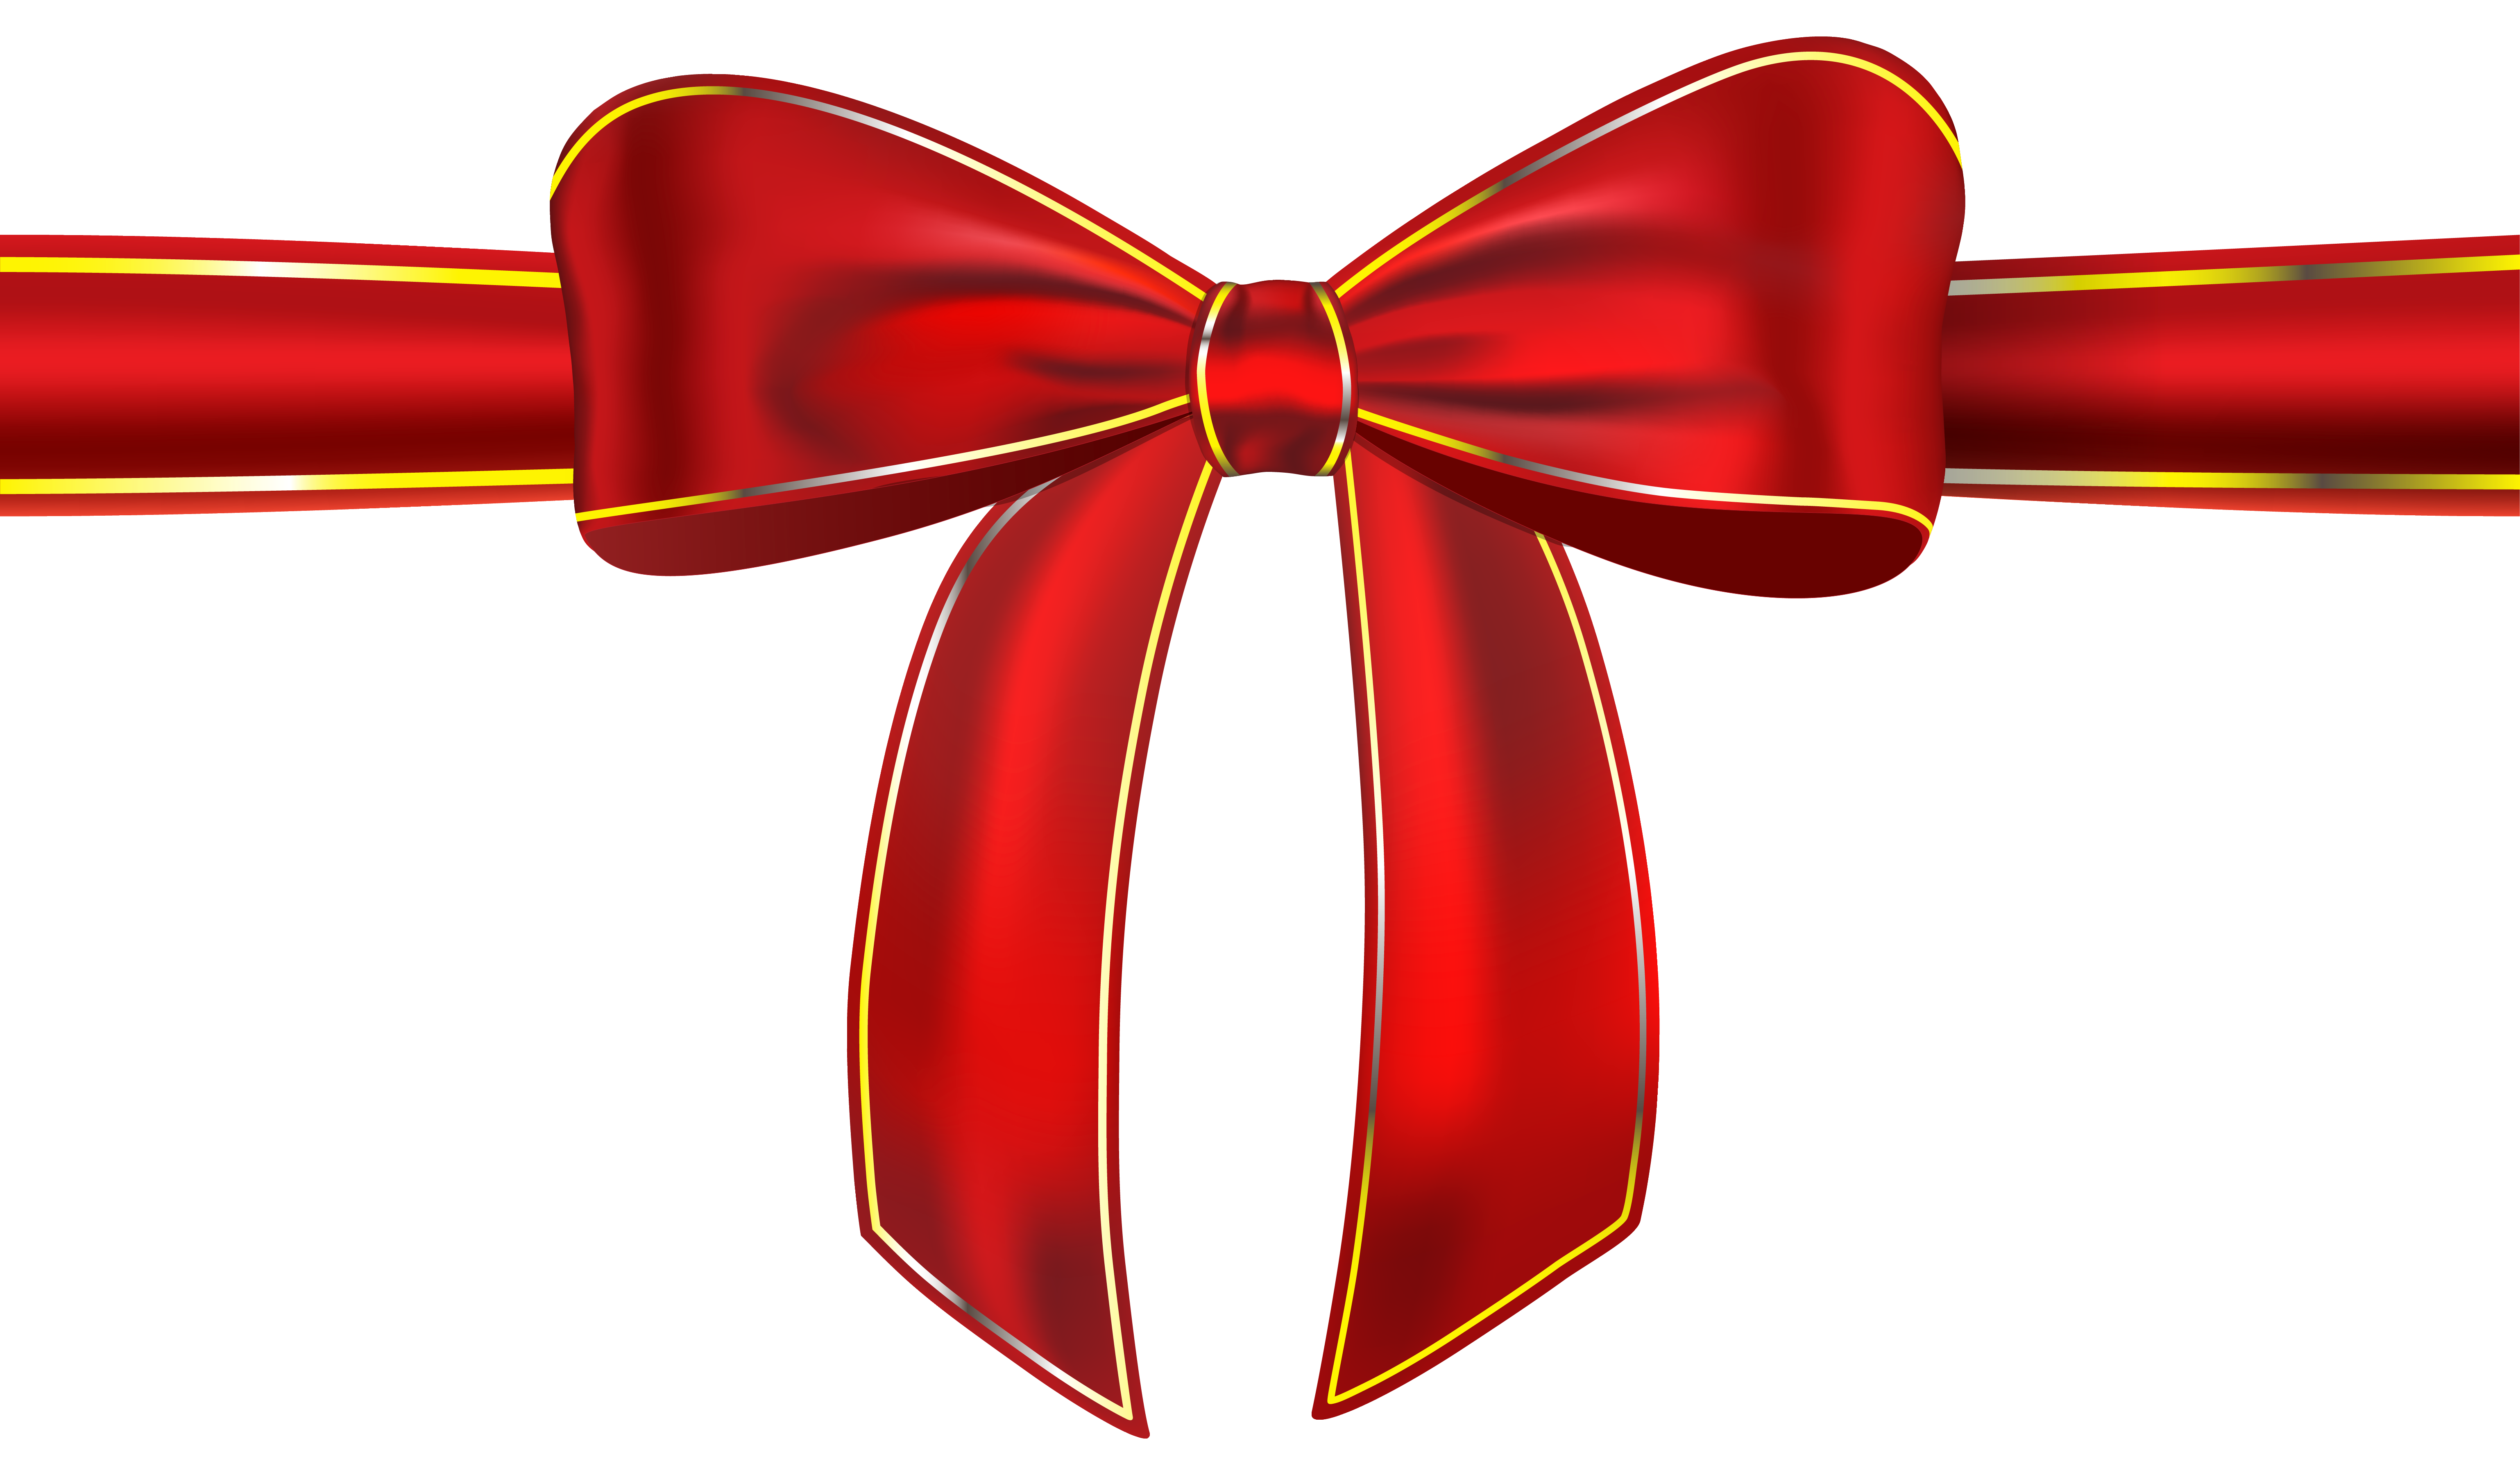 Red Ribbon Clip Art Red Ribbon With Bow Png Clipart Picture Png